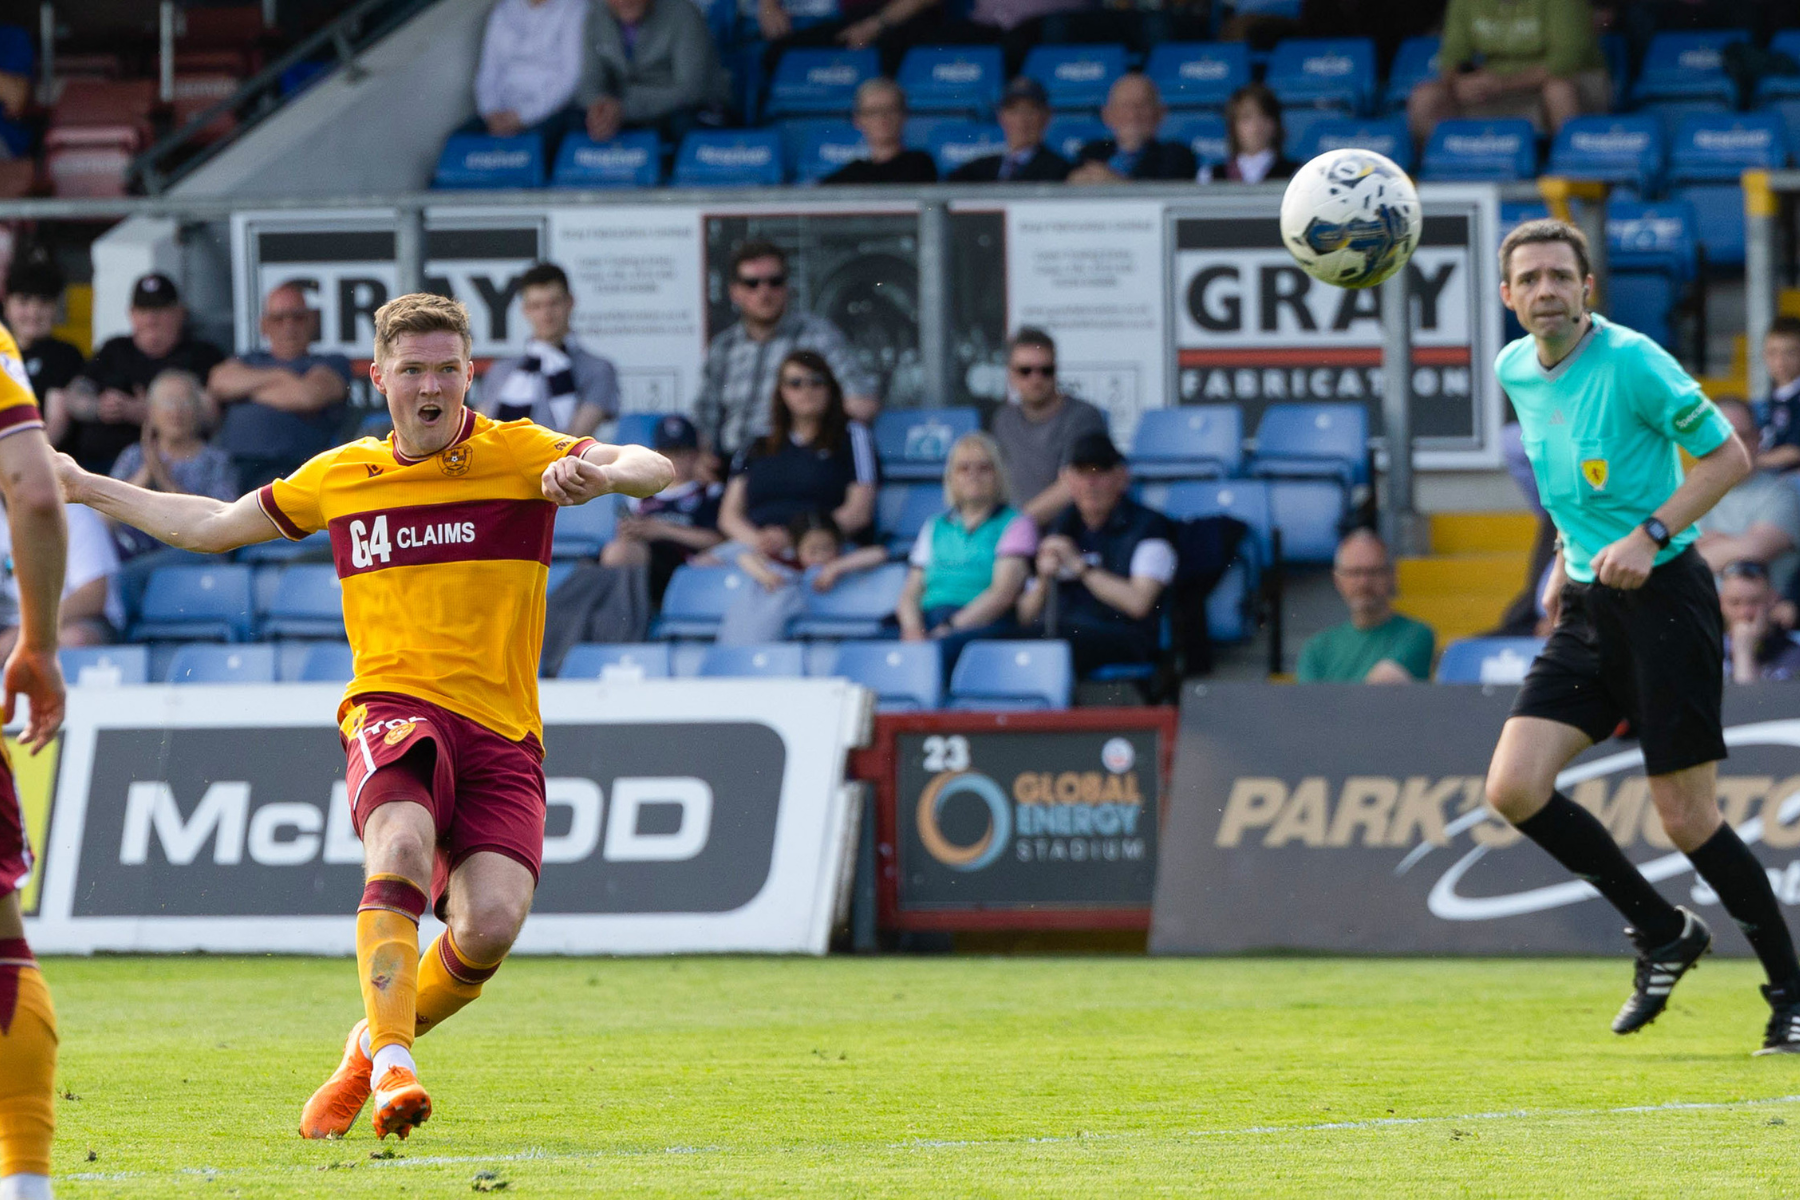 Ross County 1 Motherwell 5: Late goals see Steelmen rout